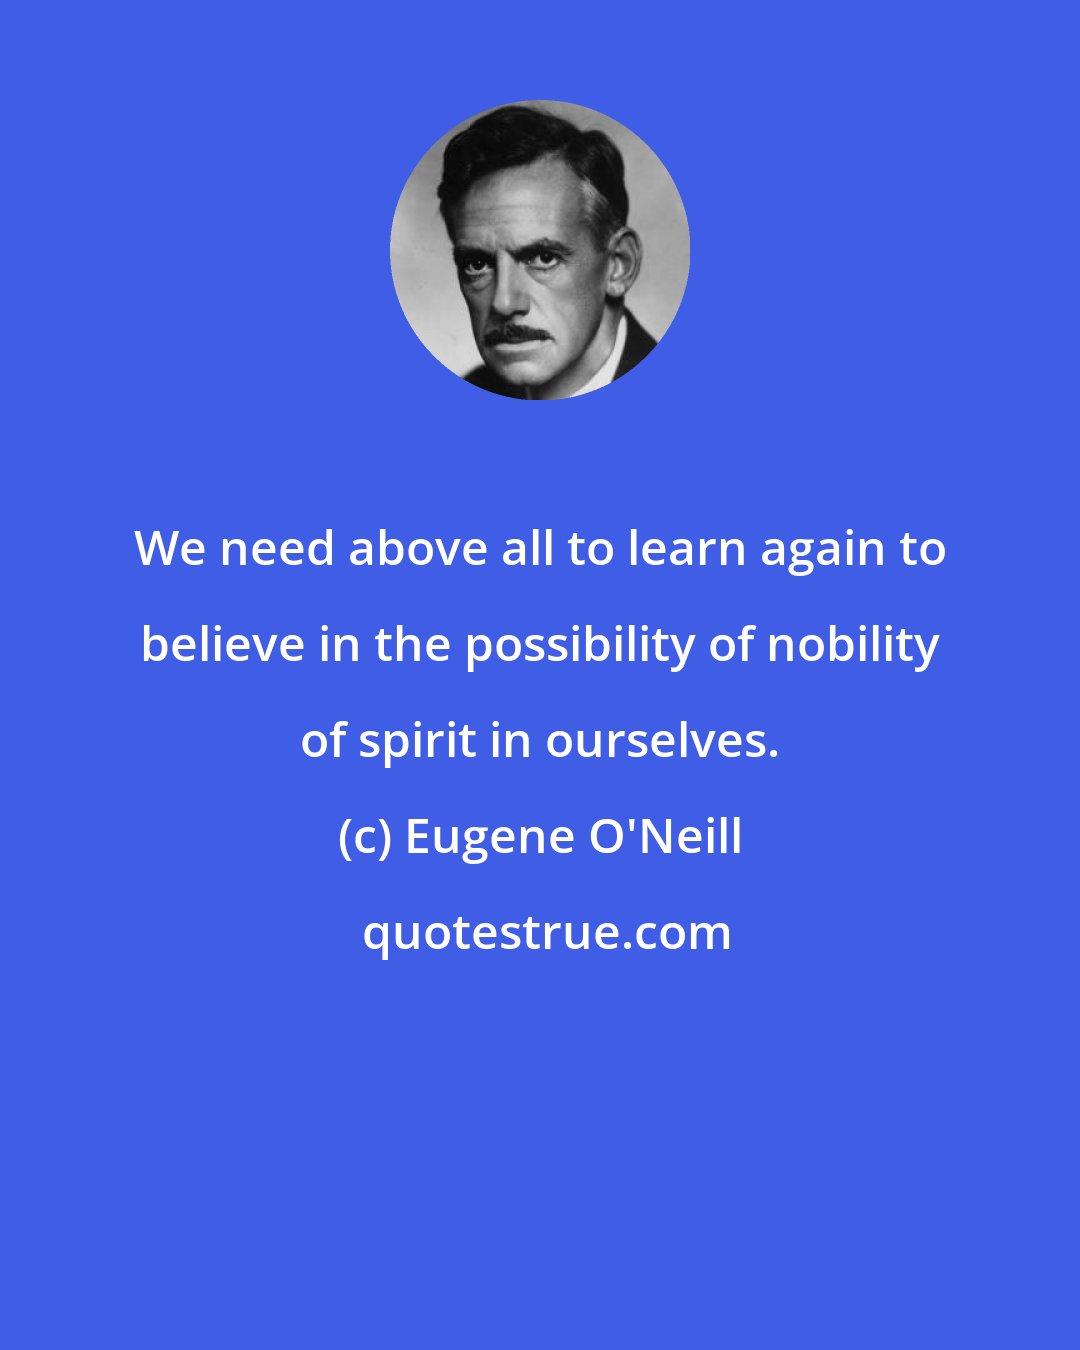 Eugene O'Neill: We need above all to learn again to believe in the possibility of nobility of spirit in ourselves.